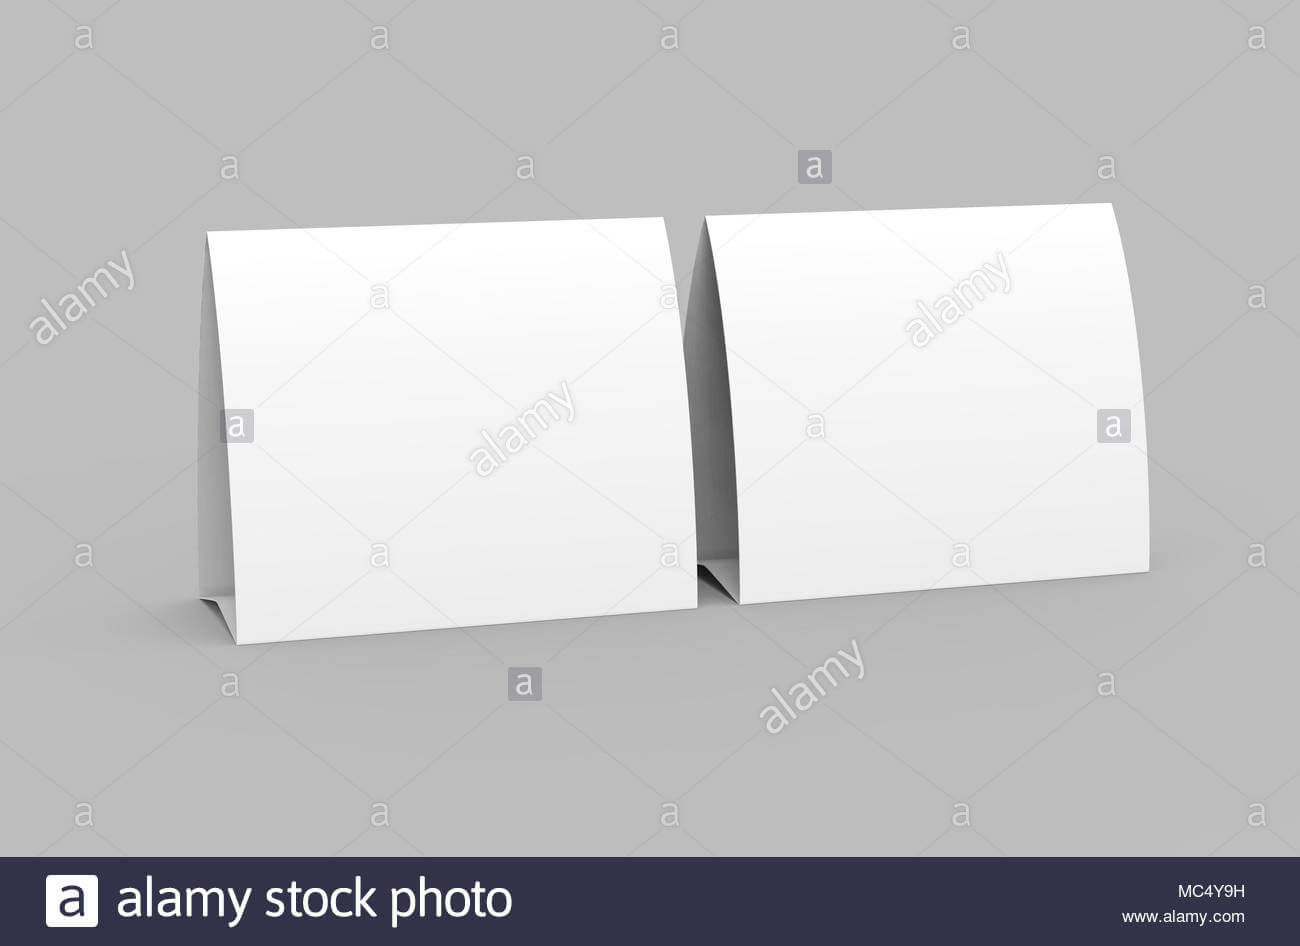 Blank Paper Tent Template, White Tent Cards Set With Empty Throughout Blank Tent Card Template